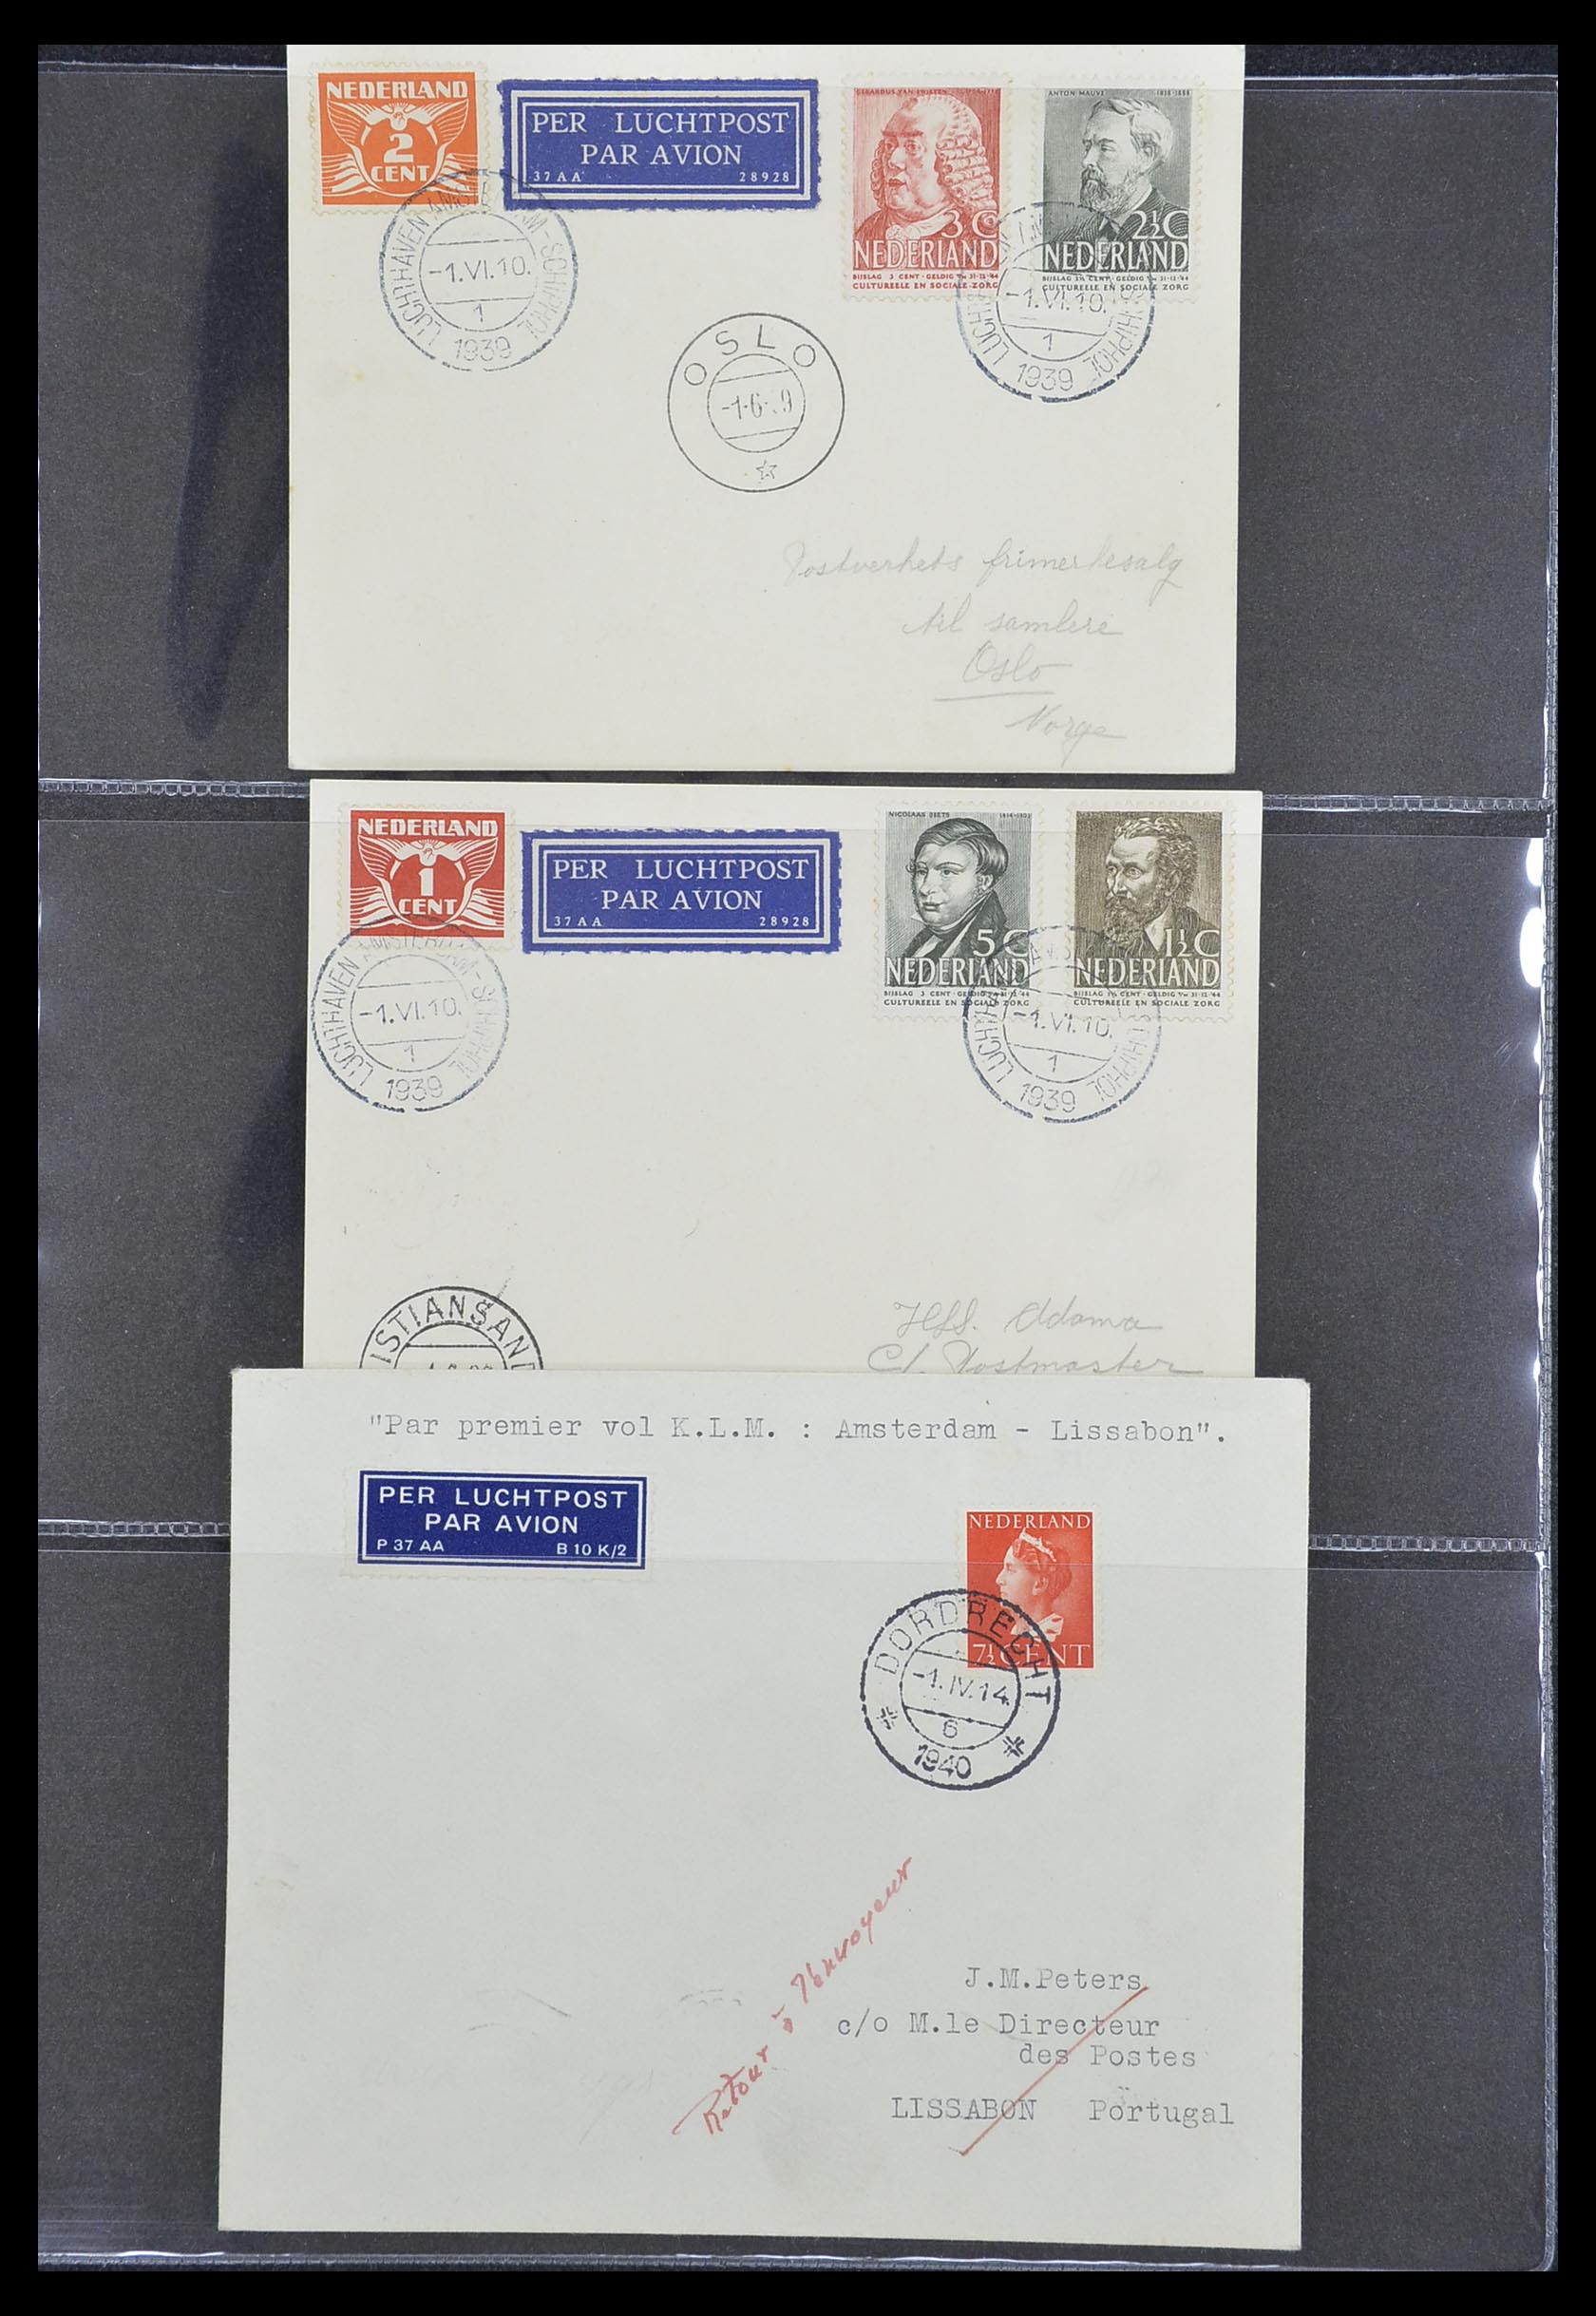 33330 137 - Stamp collection 33330 Netherlands covers 1852-1959.